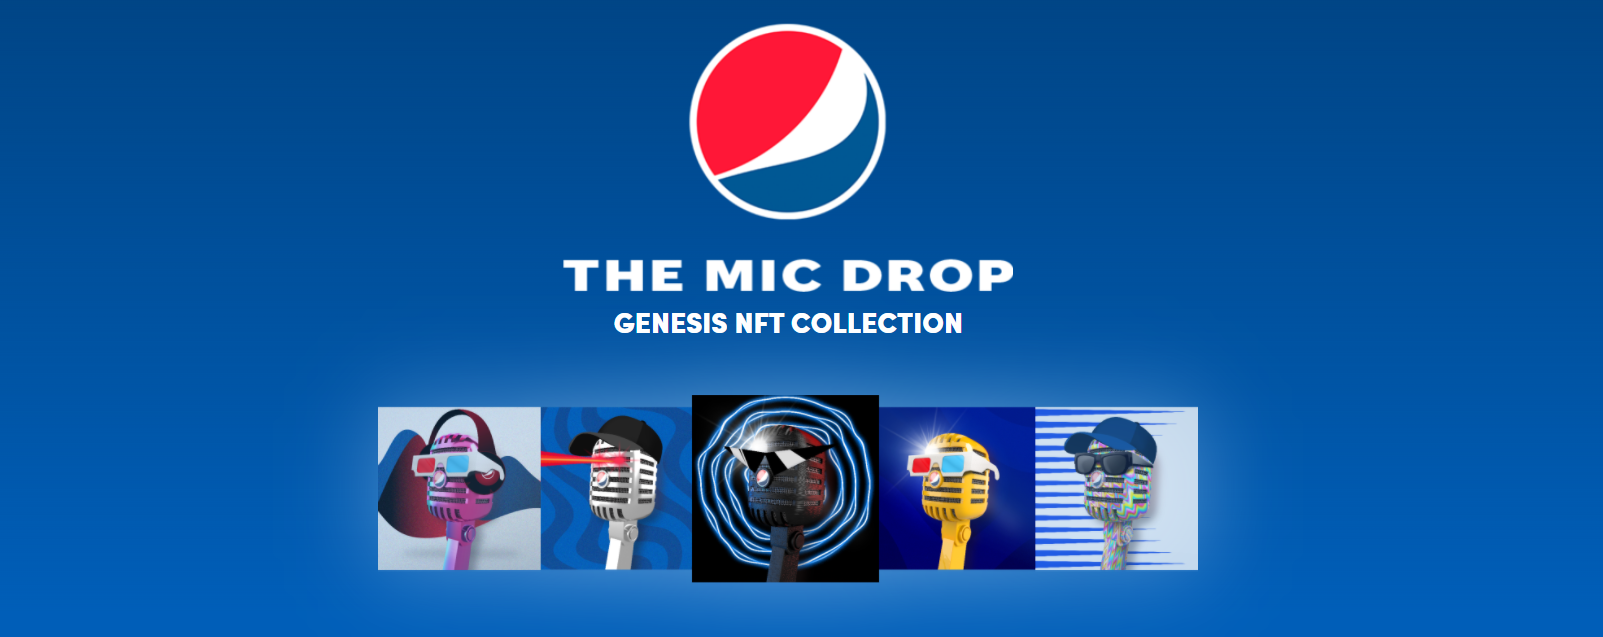 How Pepsi Can Make You (At Least) a Couple Grand in a Few Weeks — With Their “Mic Drop” NFT